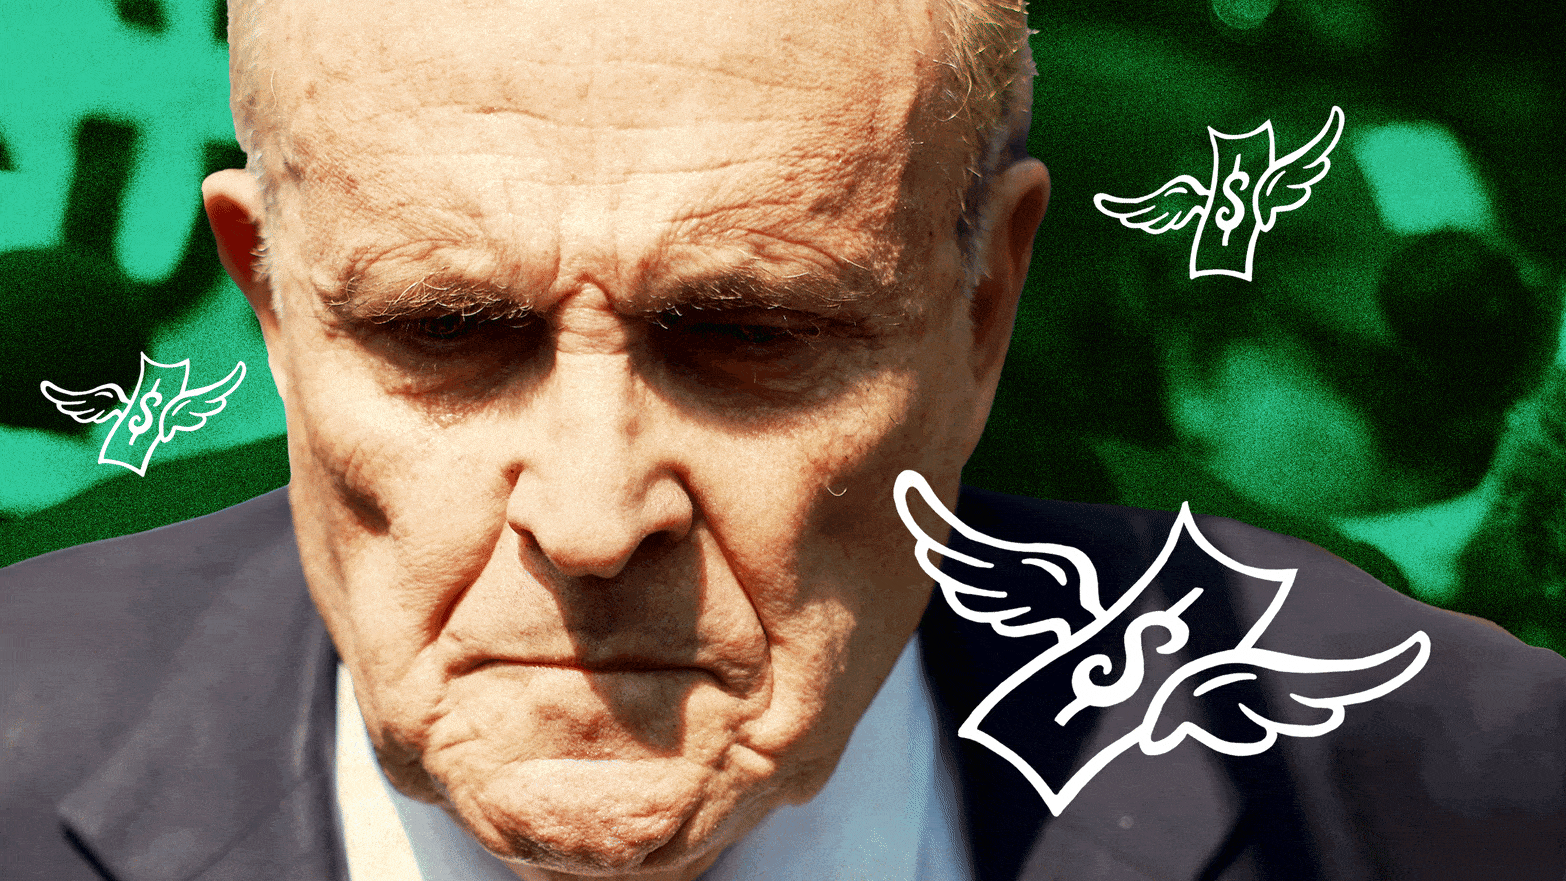 Rudy Giuliani looking dour on a green background with illustrations of money flying away.